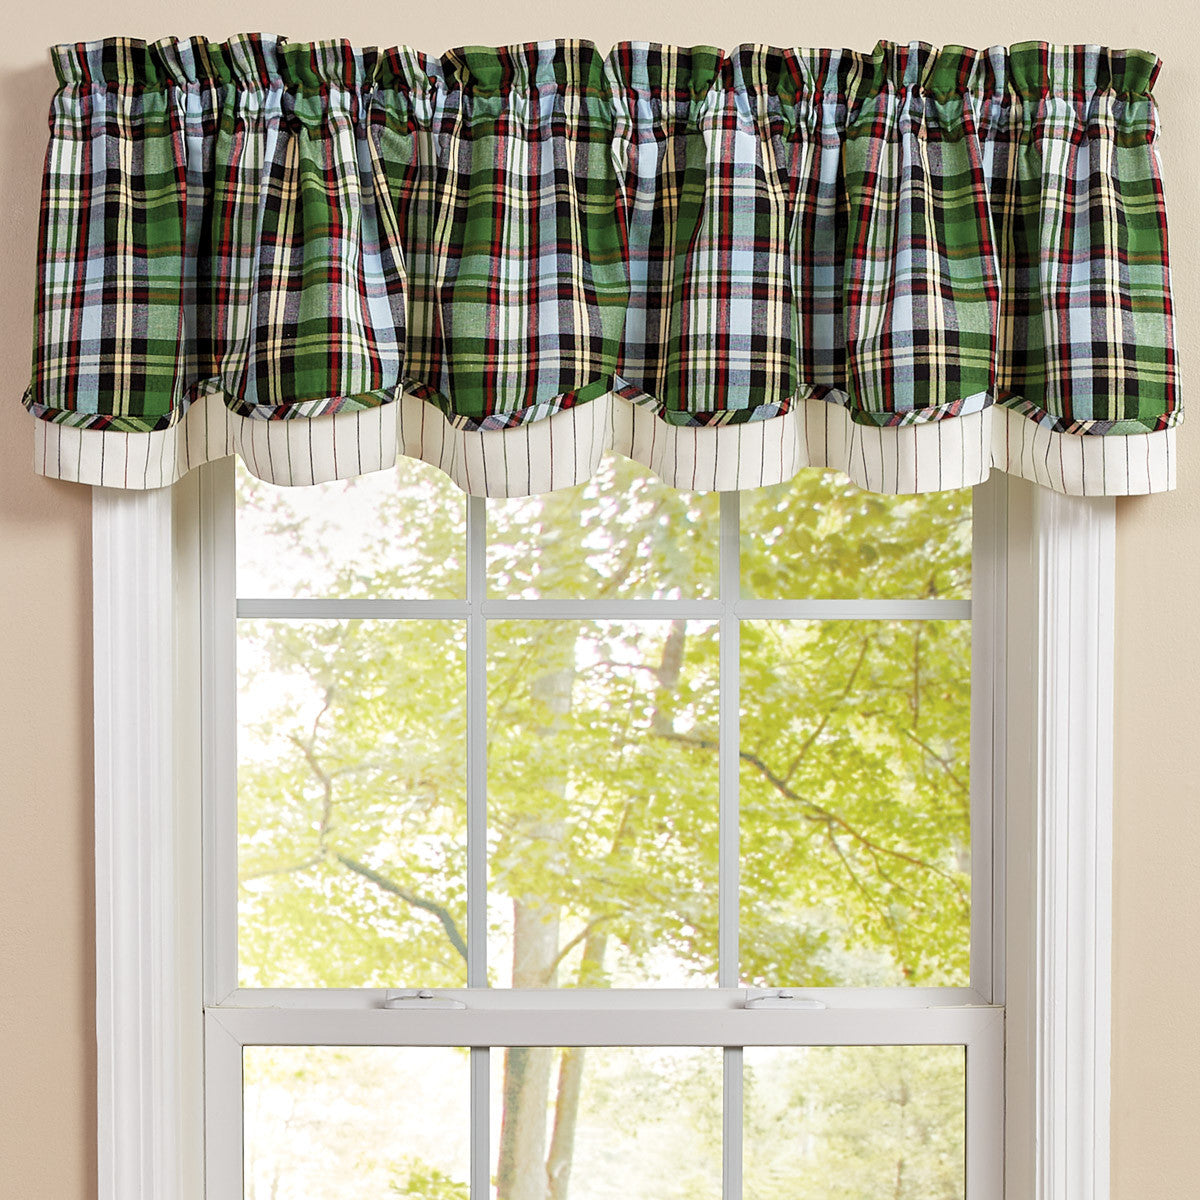 Happy Trails Valance - Lined Layered 72x16 Park Designs